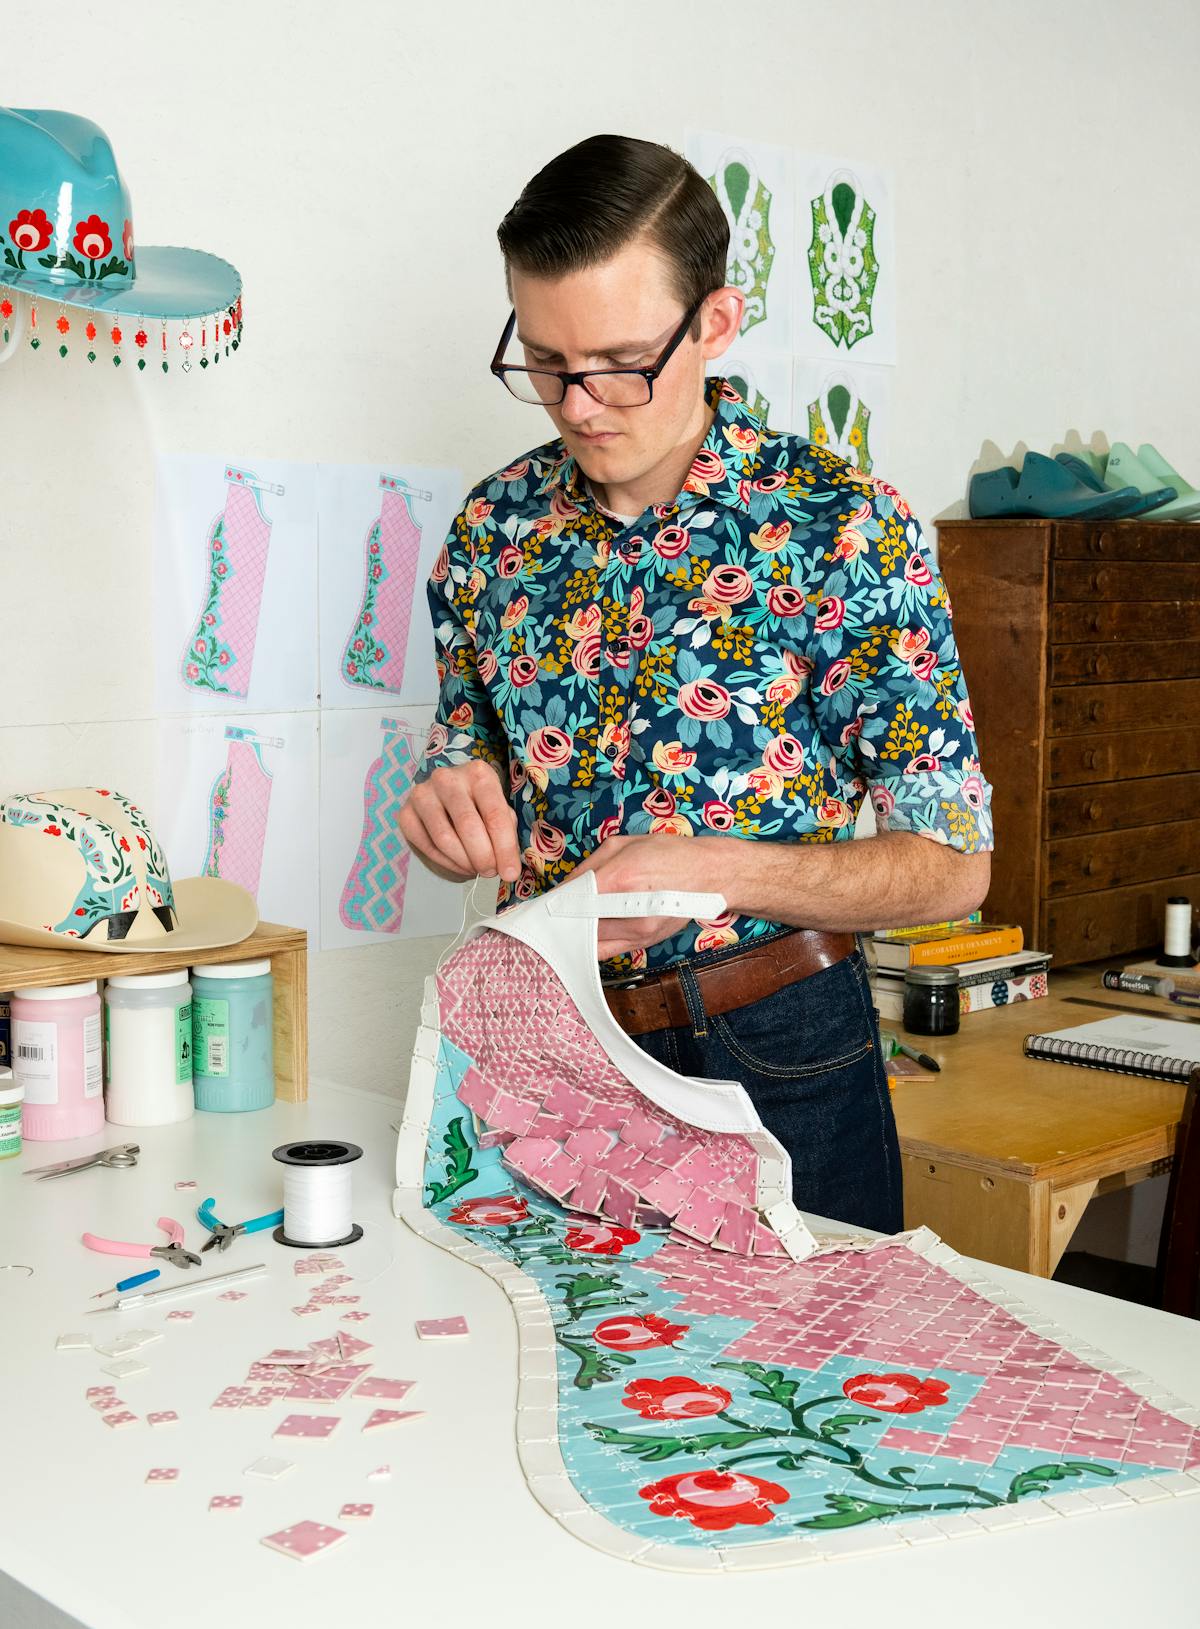 fashion artist sewing a ornate floral pink and blue chaps made from tiles